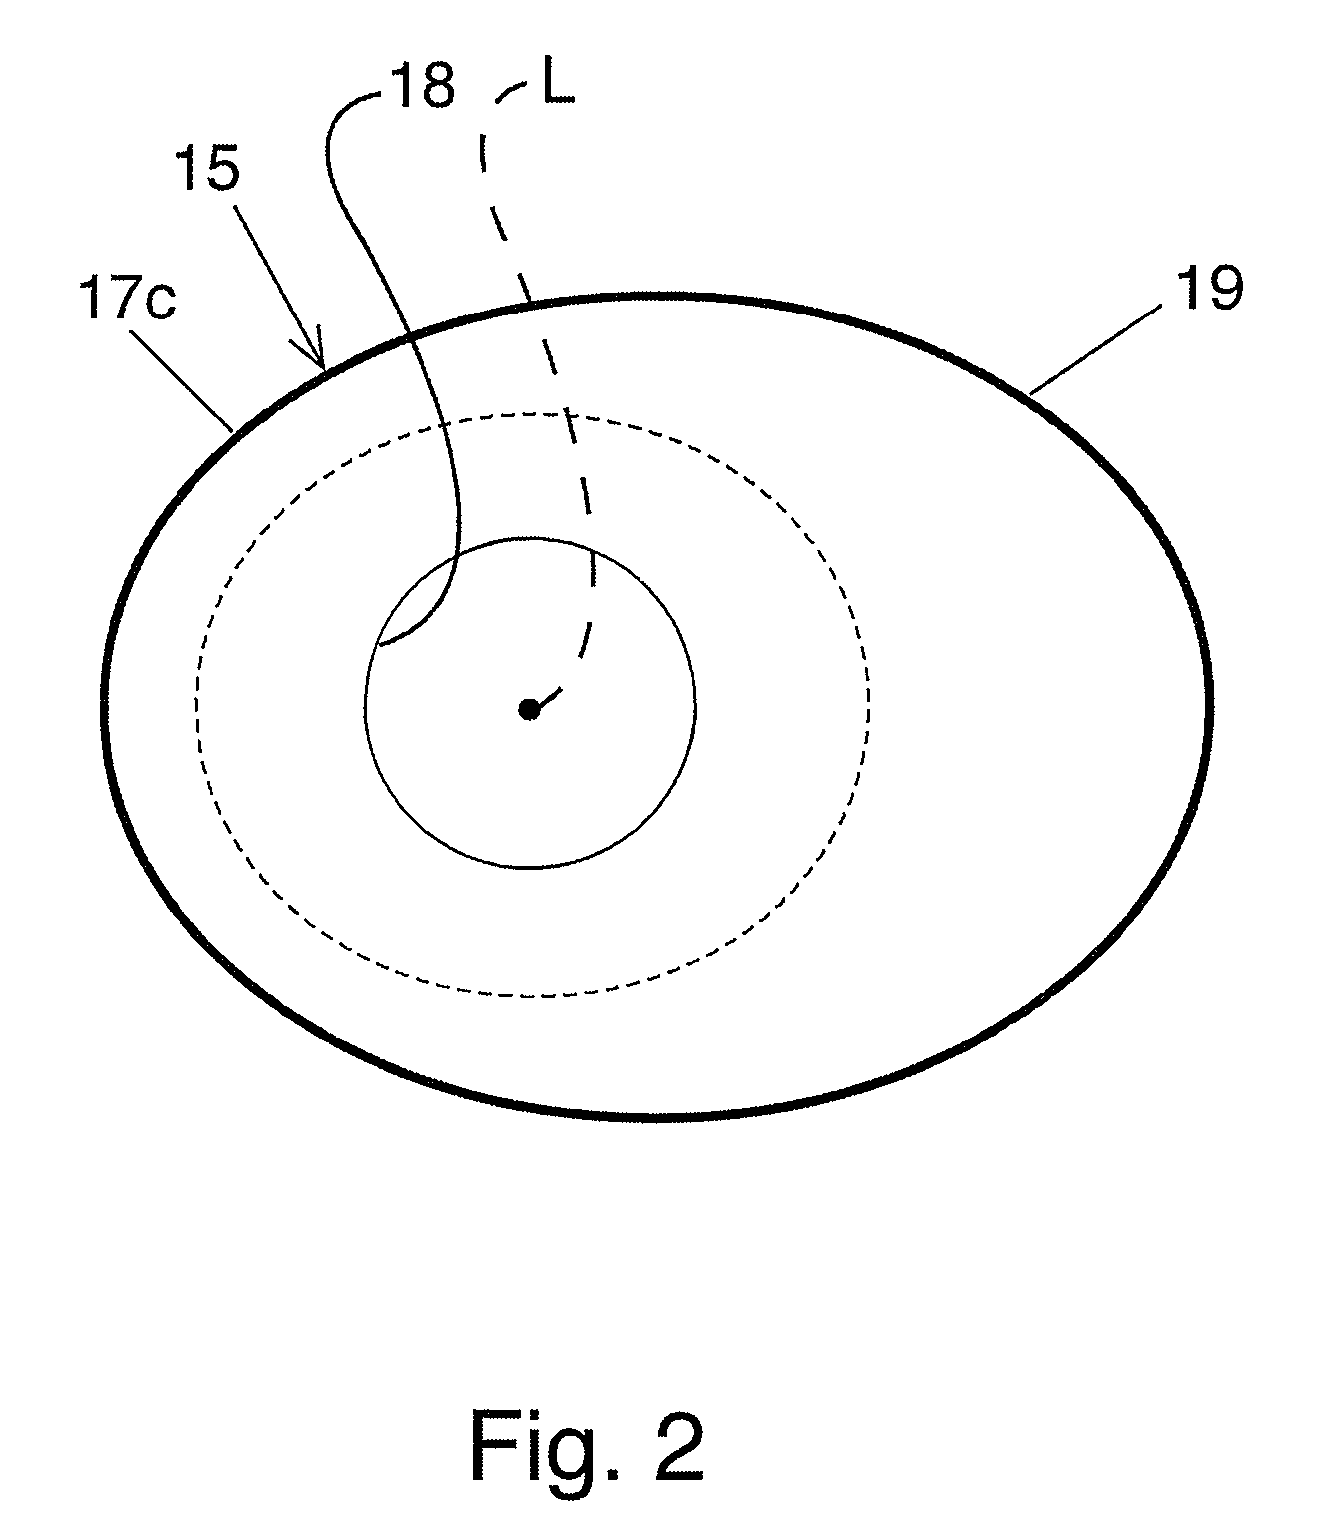 Bariatric device and method